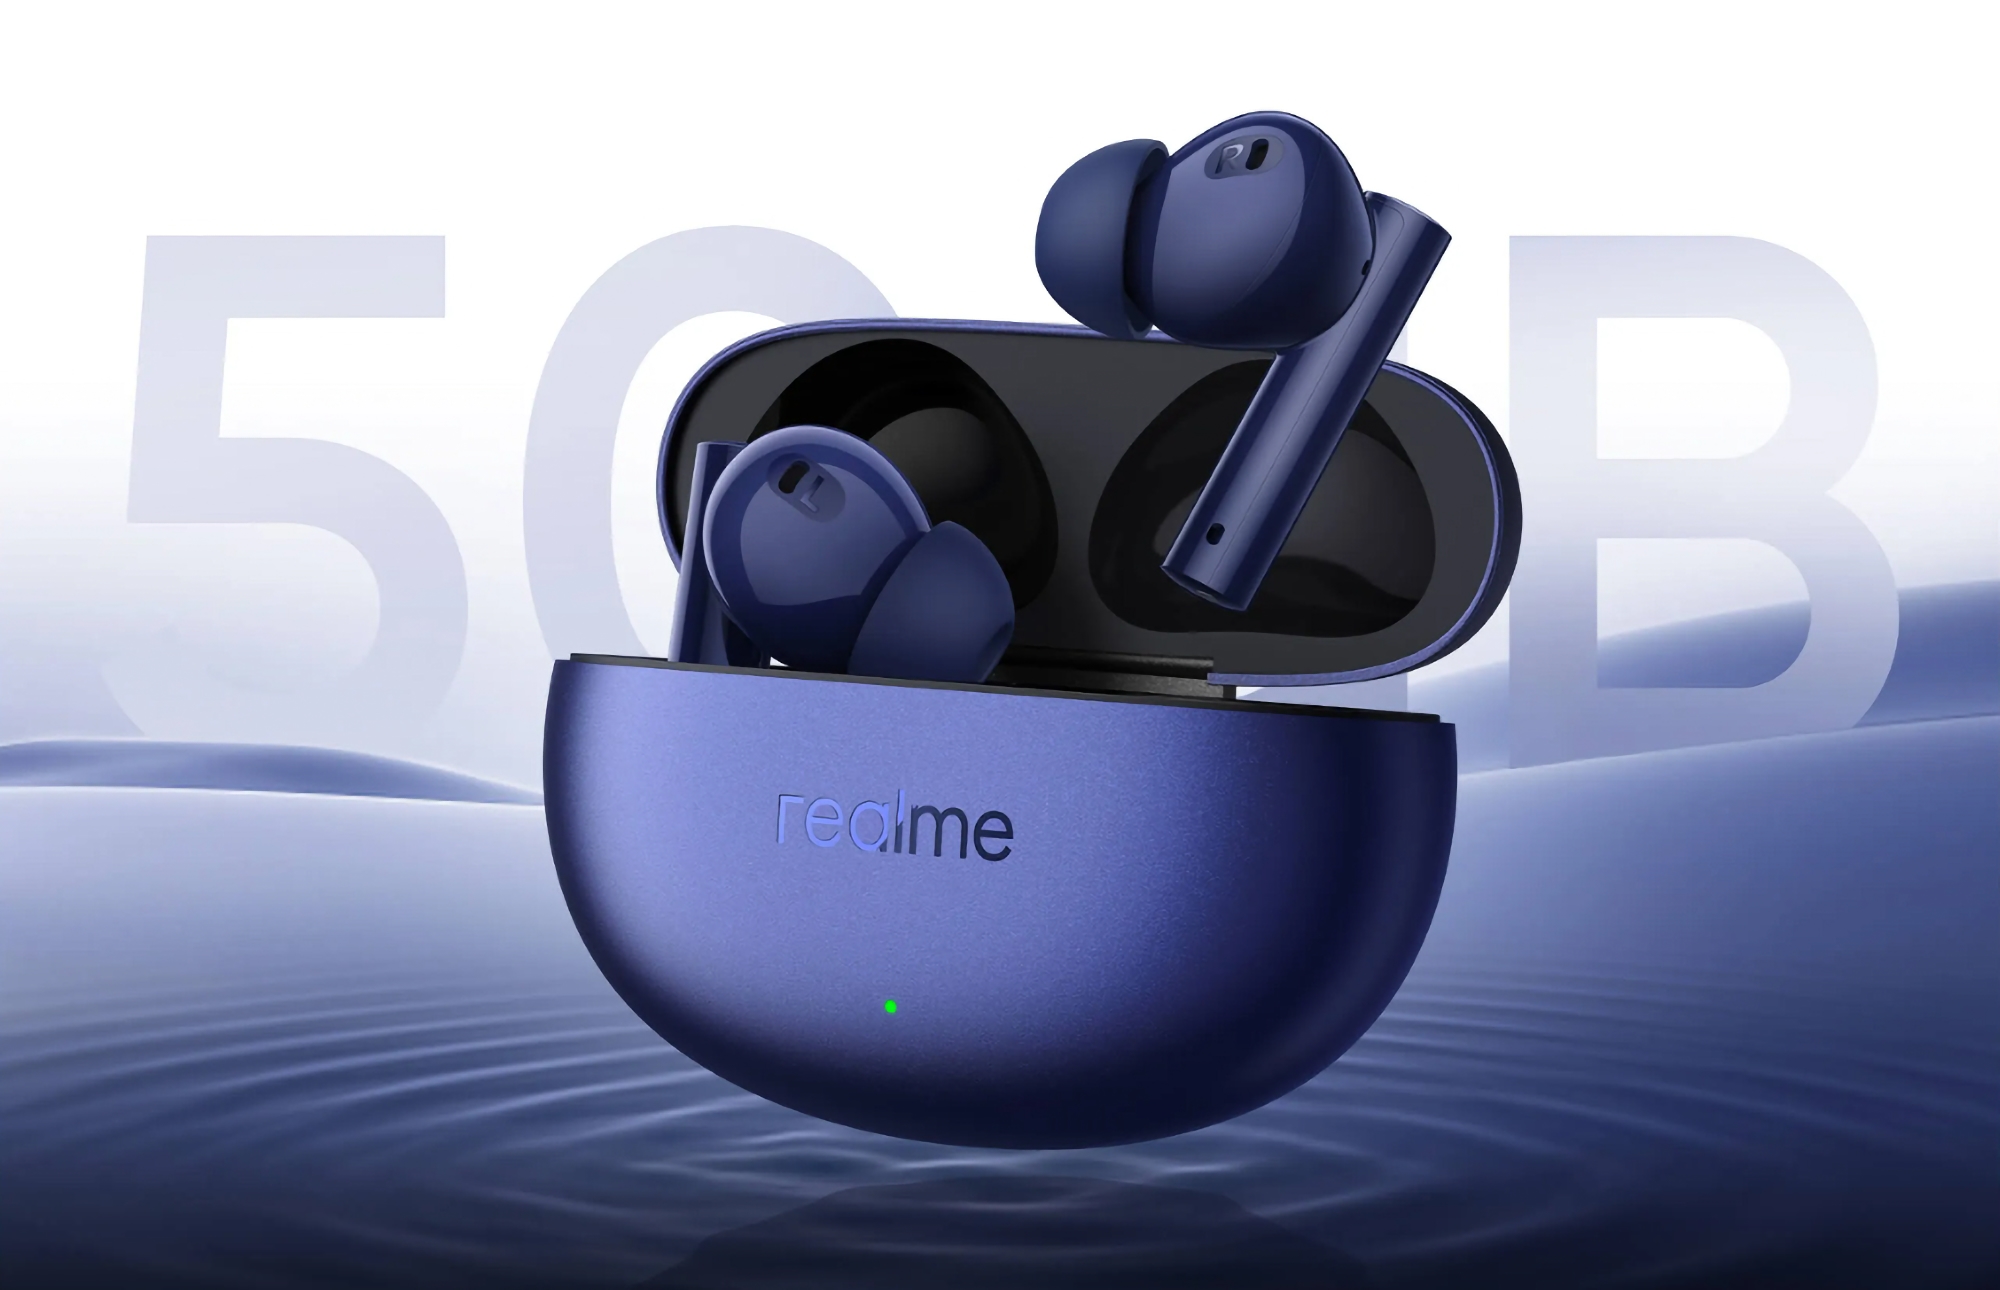 Not just the realme GT 5: realme will also unveil new TWS headphones on 28 August